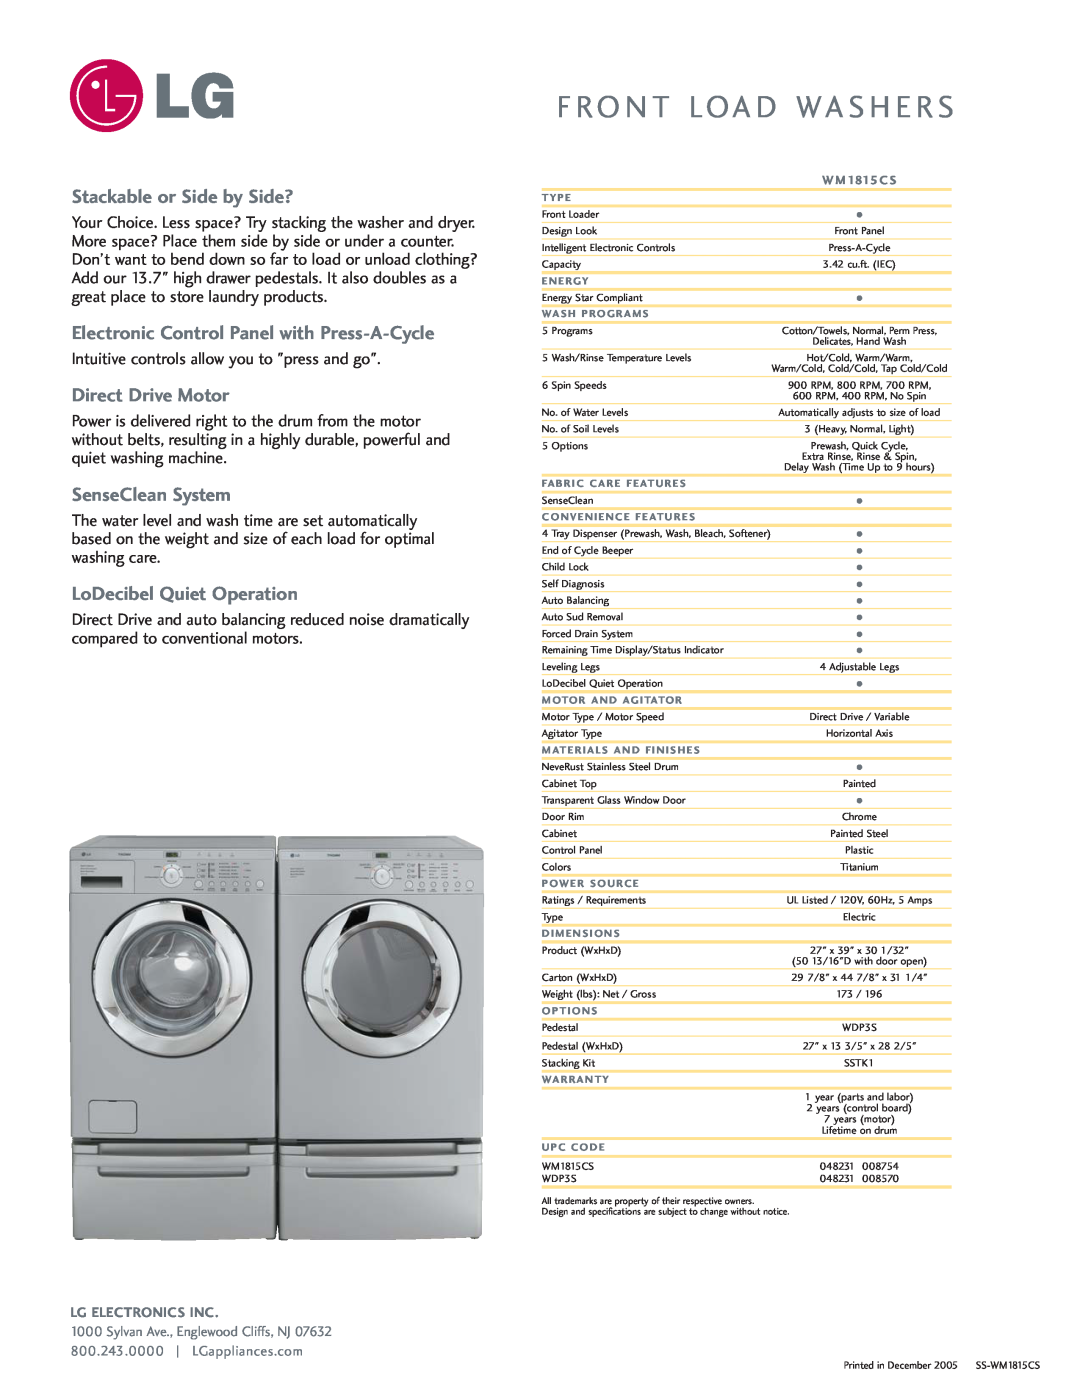 LG Electronics 556 manual Stackable or Side by Side?, Electronic Control Panel with Press-A-Cycle, Direct Drive Motor 